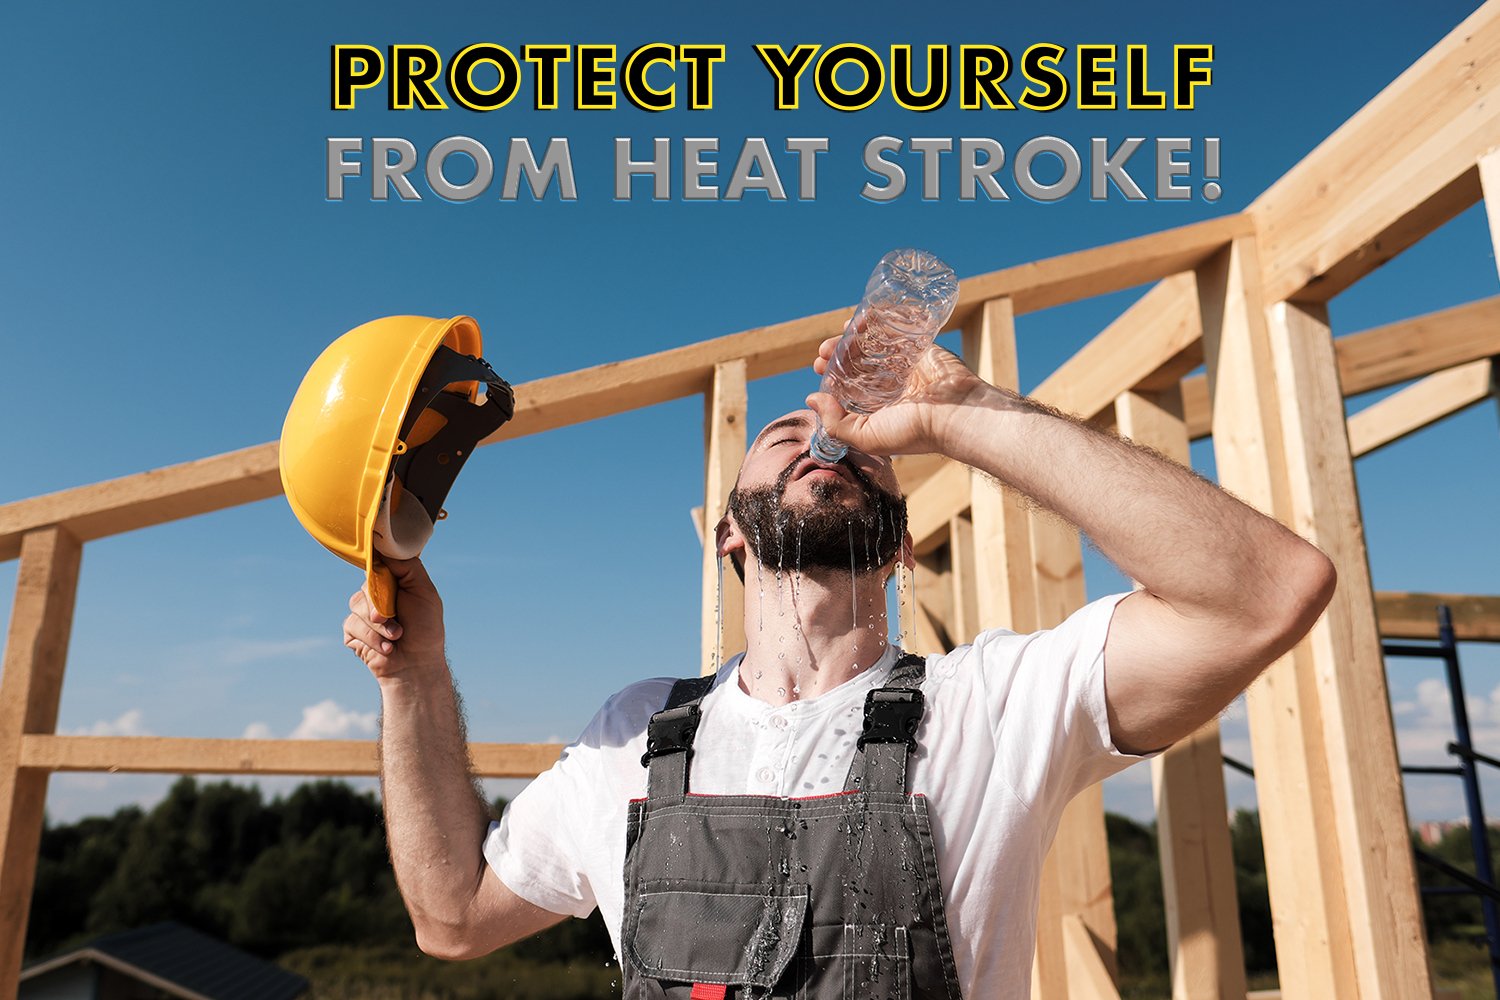 7 Things Every Contractor Should Know About Working In The Heat